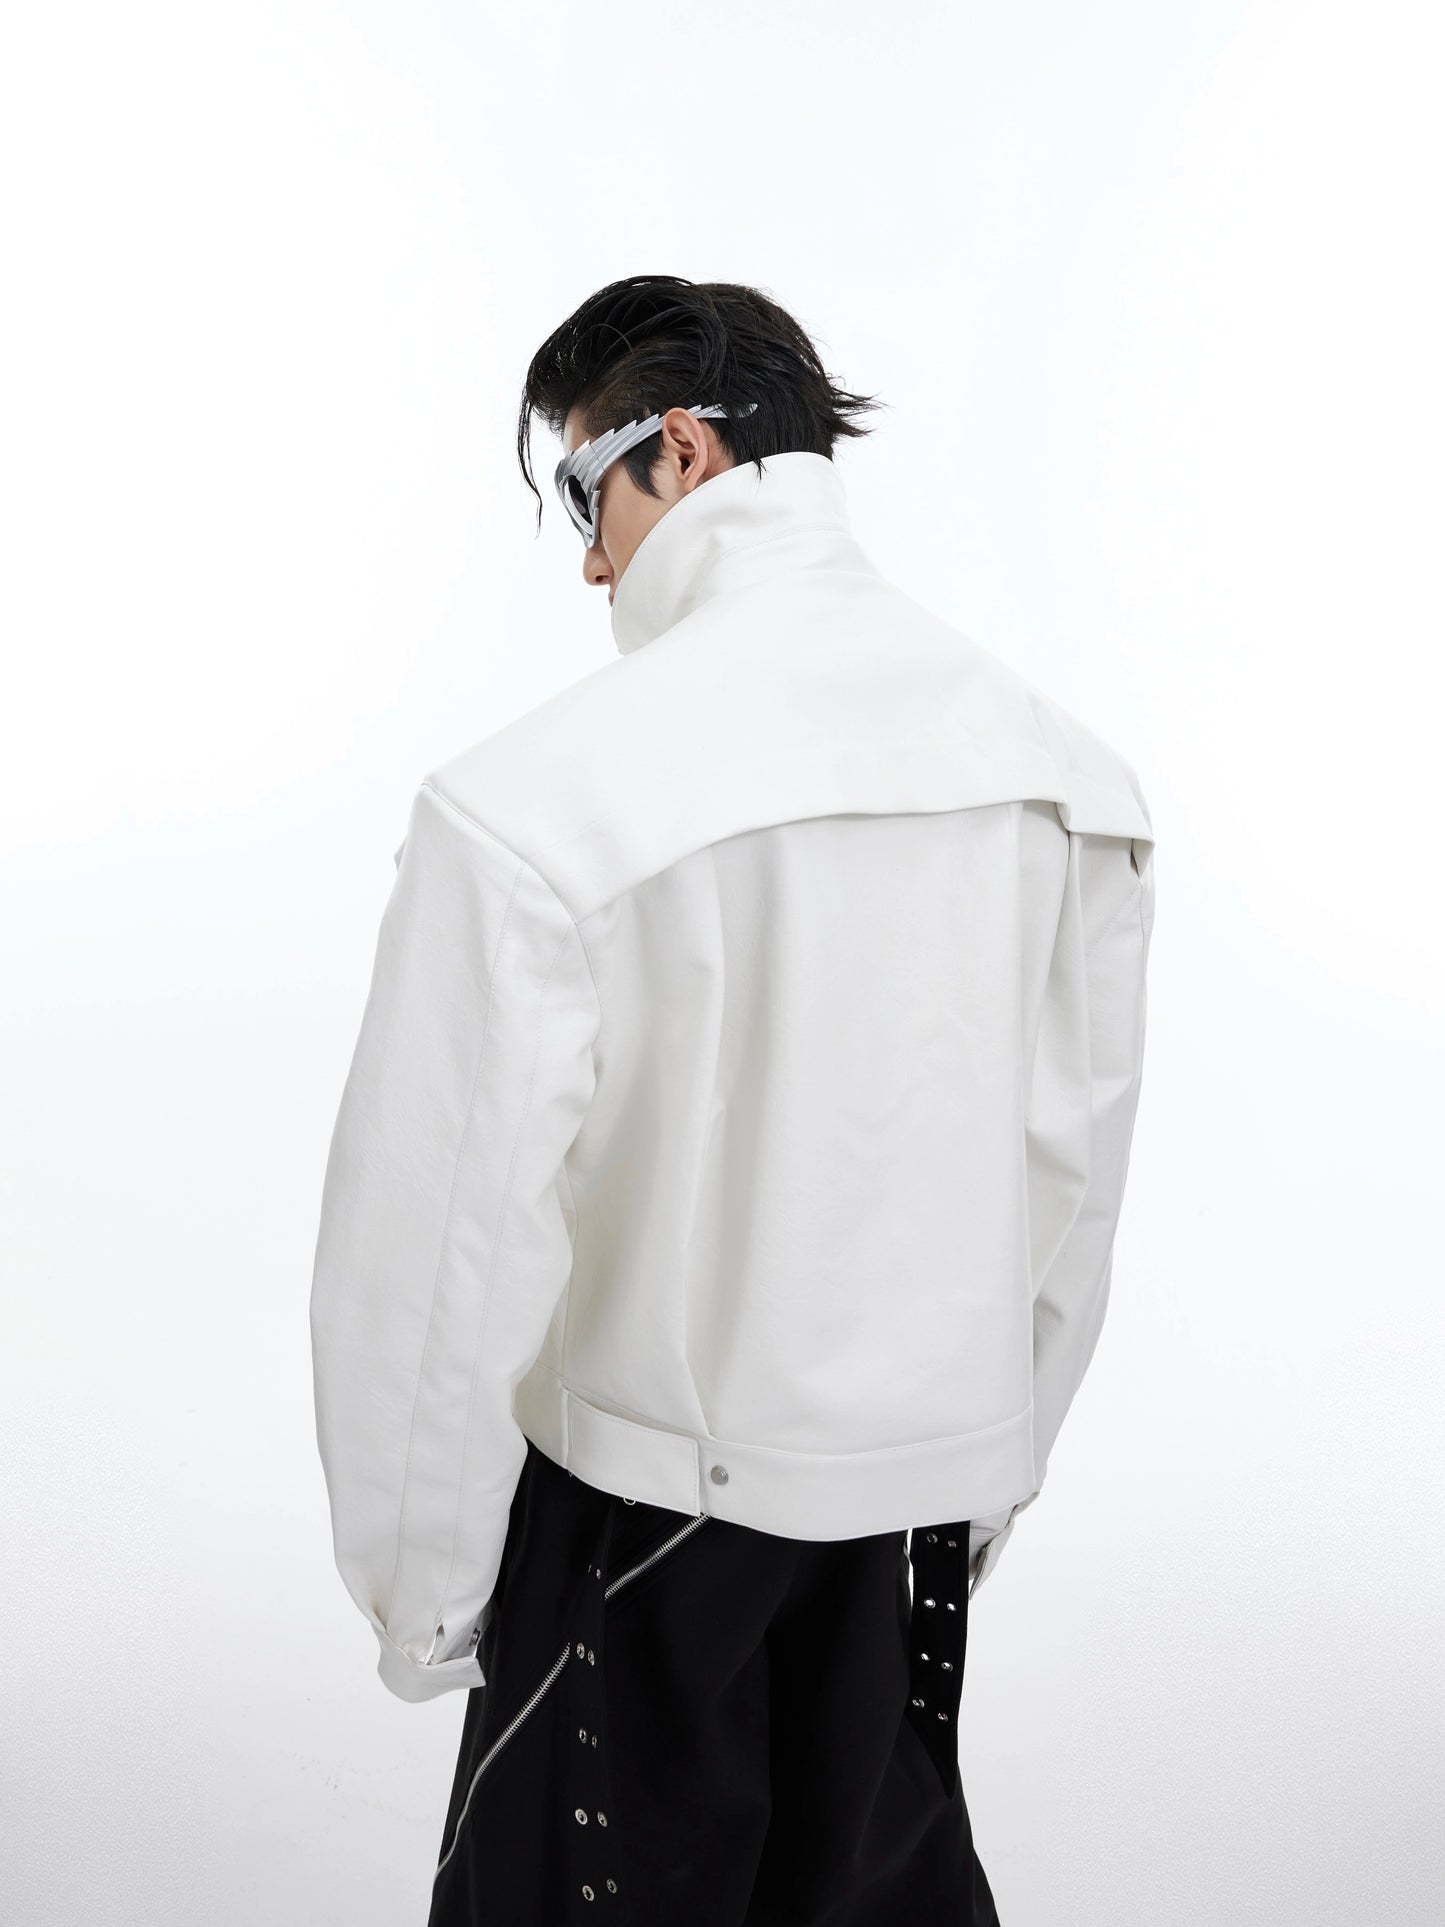 Cultur E24ss's new three-dimensional deconstructed padded shoulder jacket jacket with a sense of high design and a niche short PU leather jacket